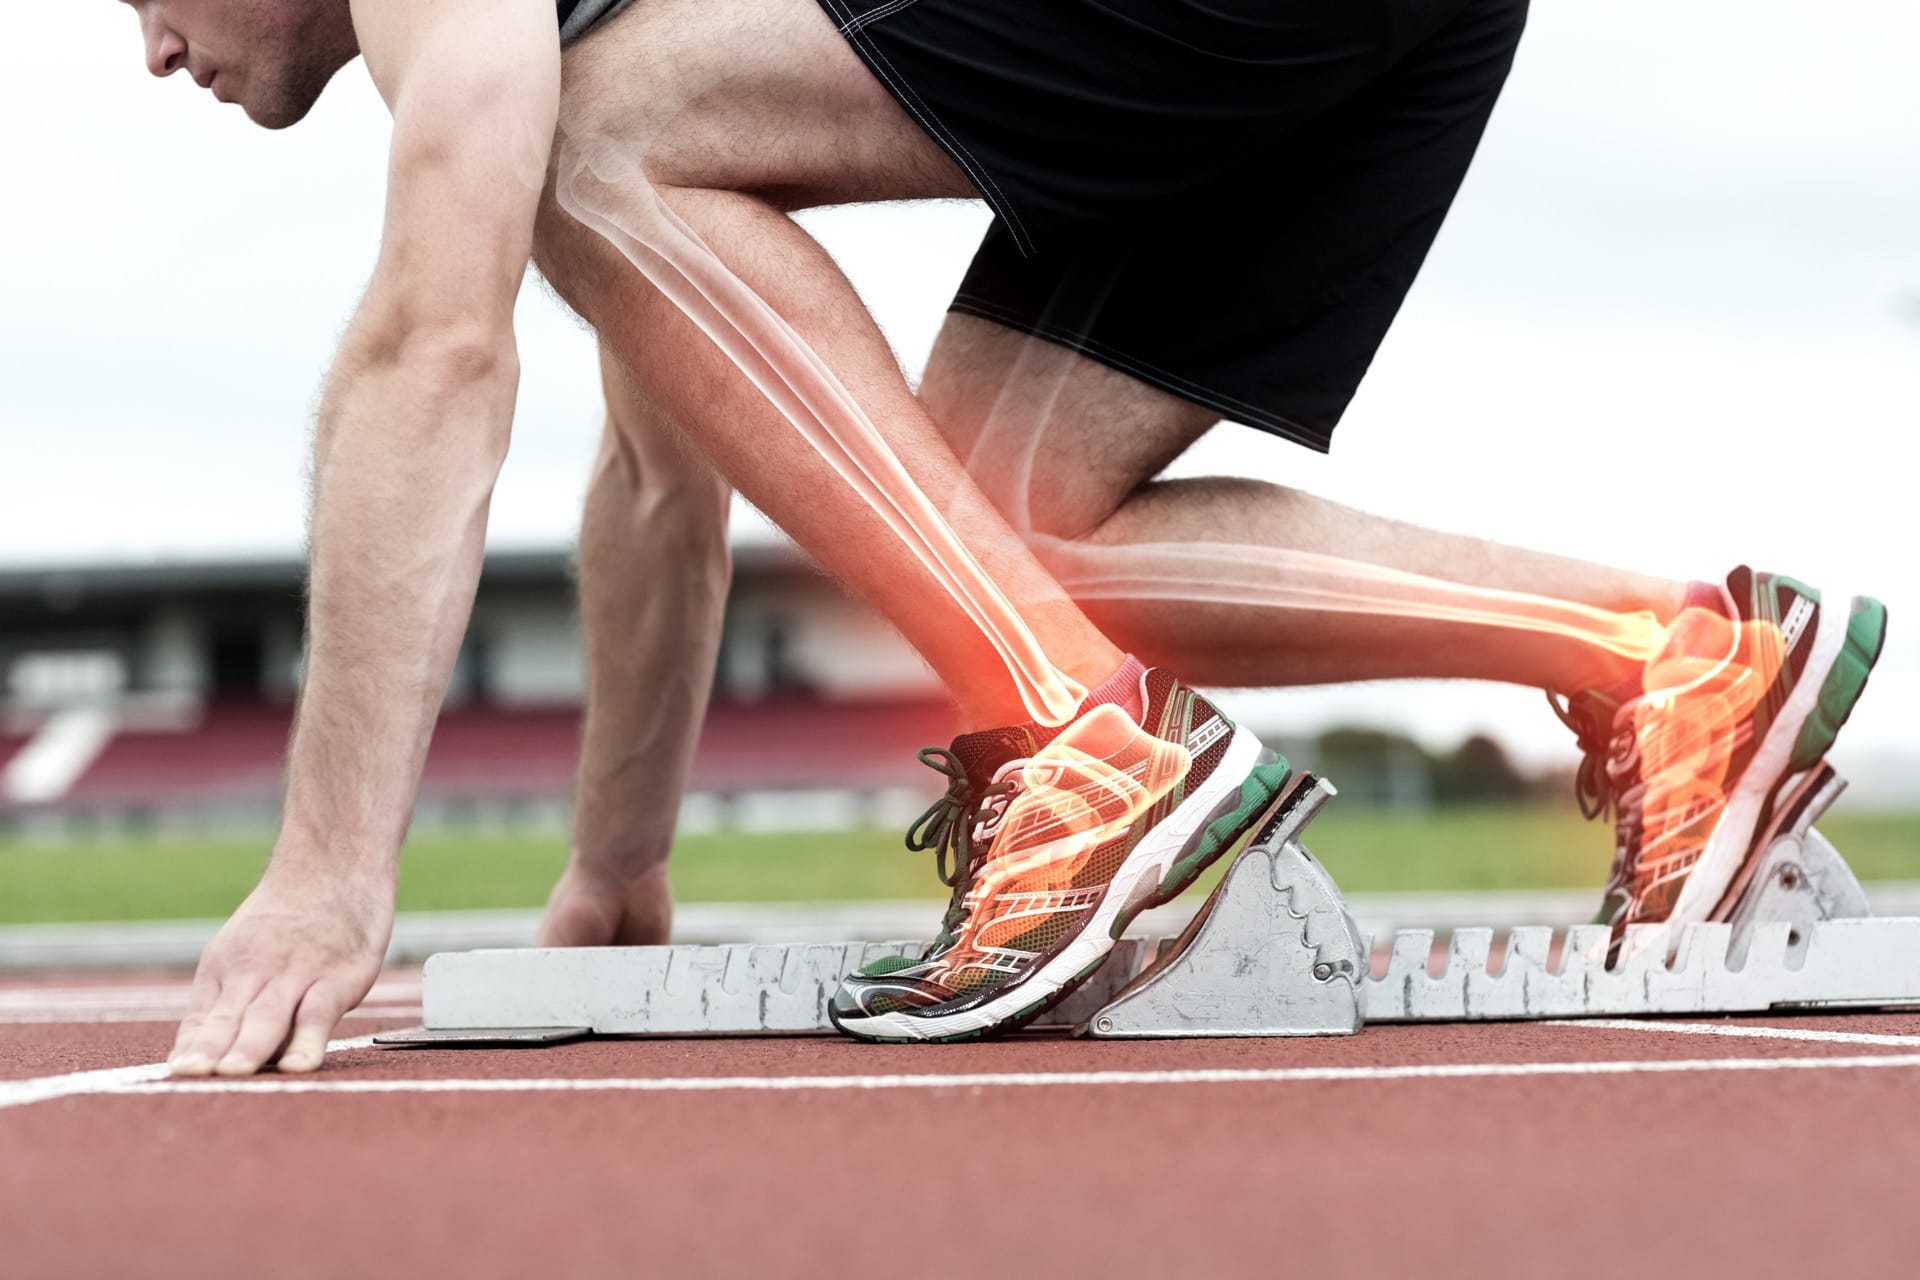 What Is The Effect Of Exercise On Bones?